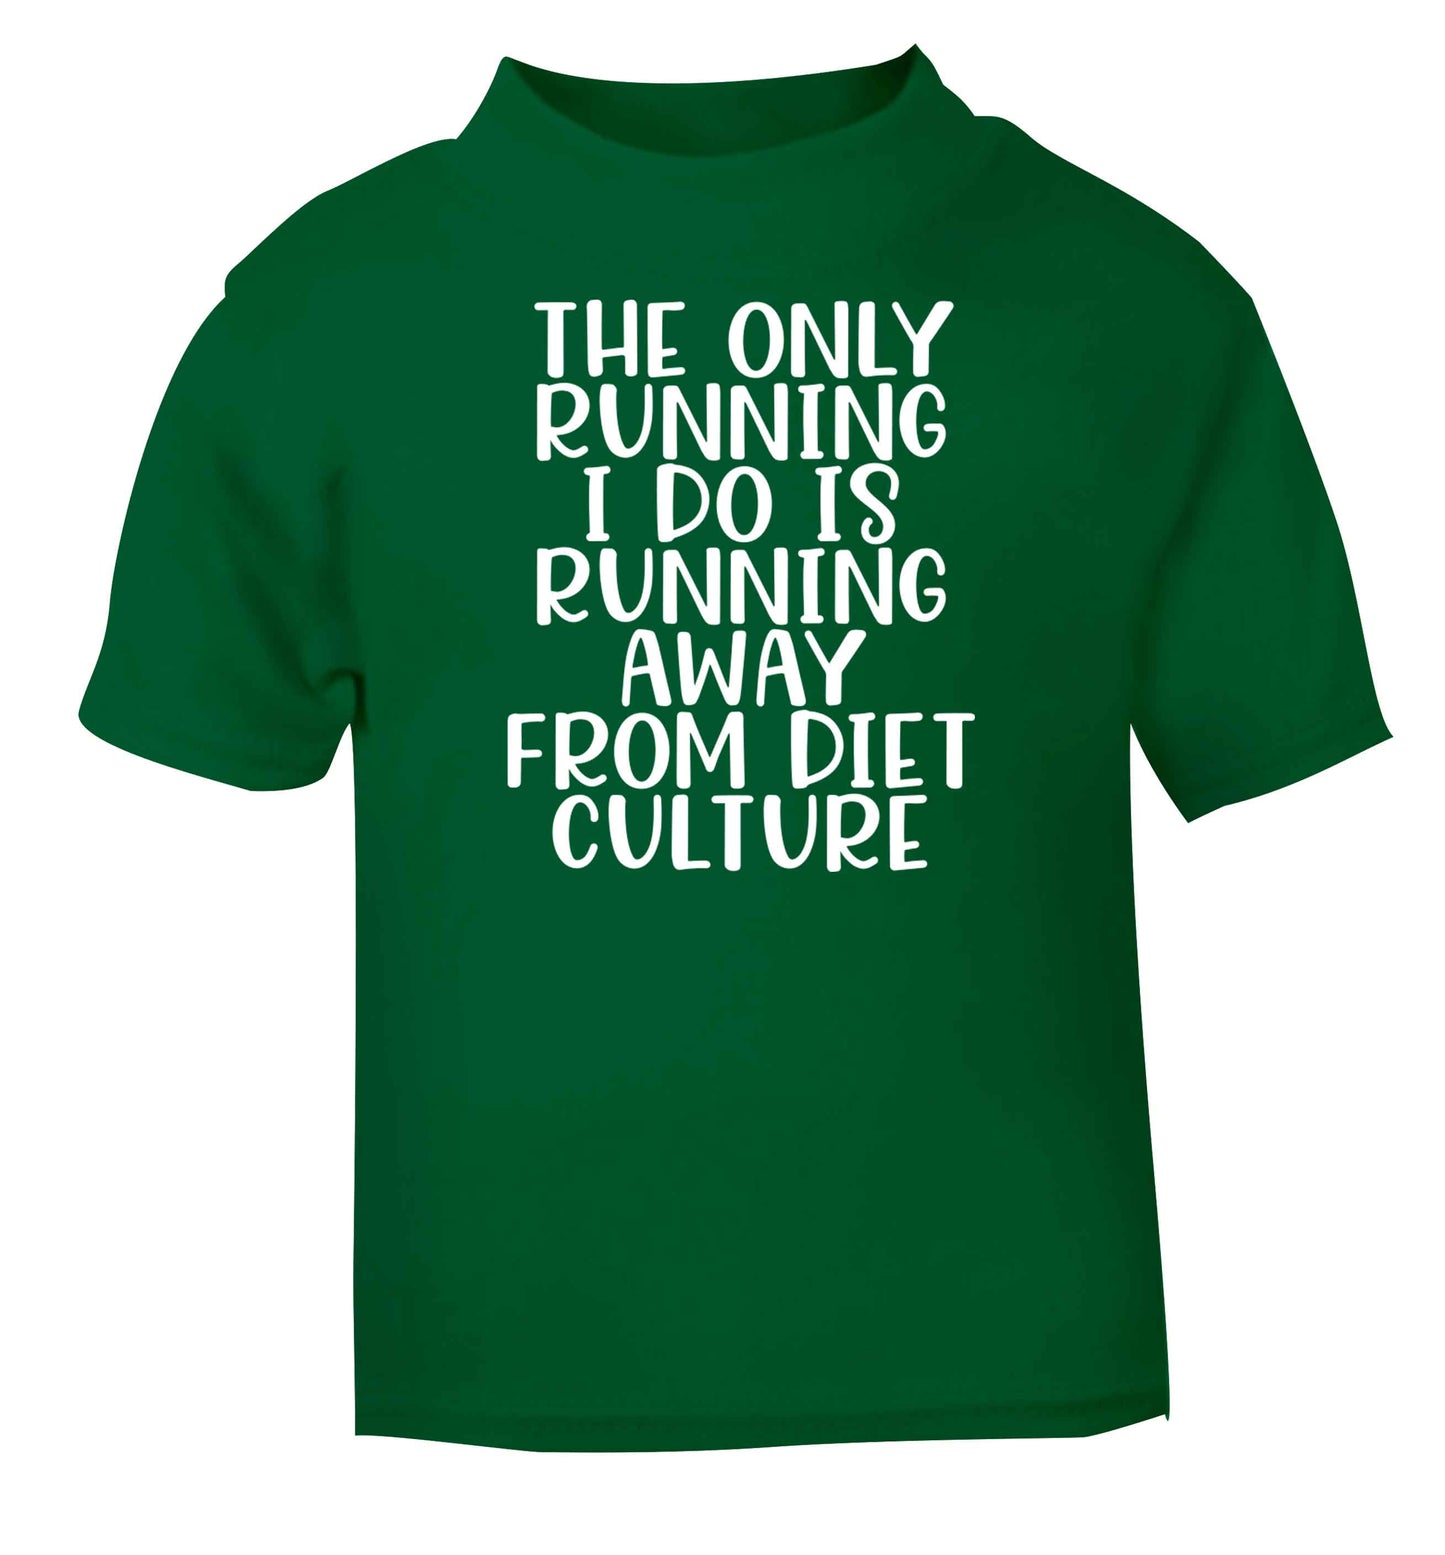 The only running I do is running away from diet culture green baby toddler Tshirt 2 Years